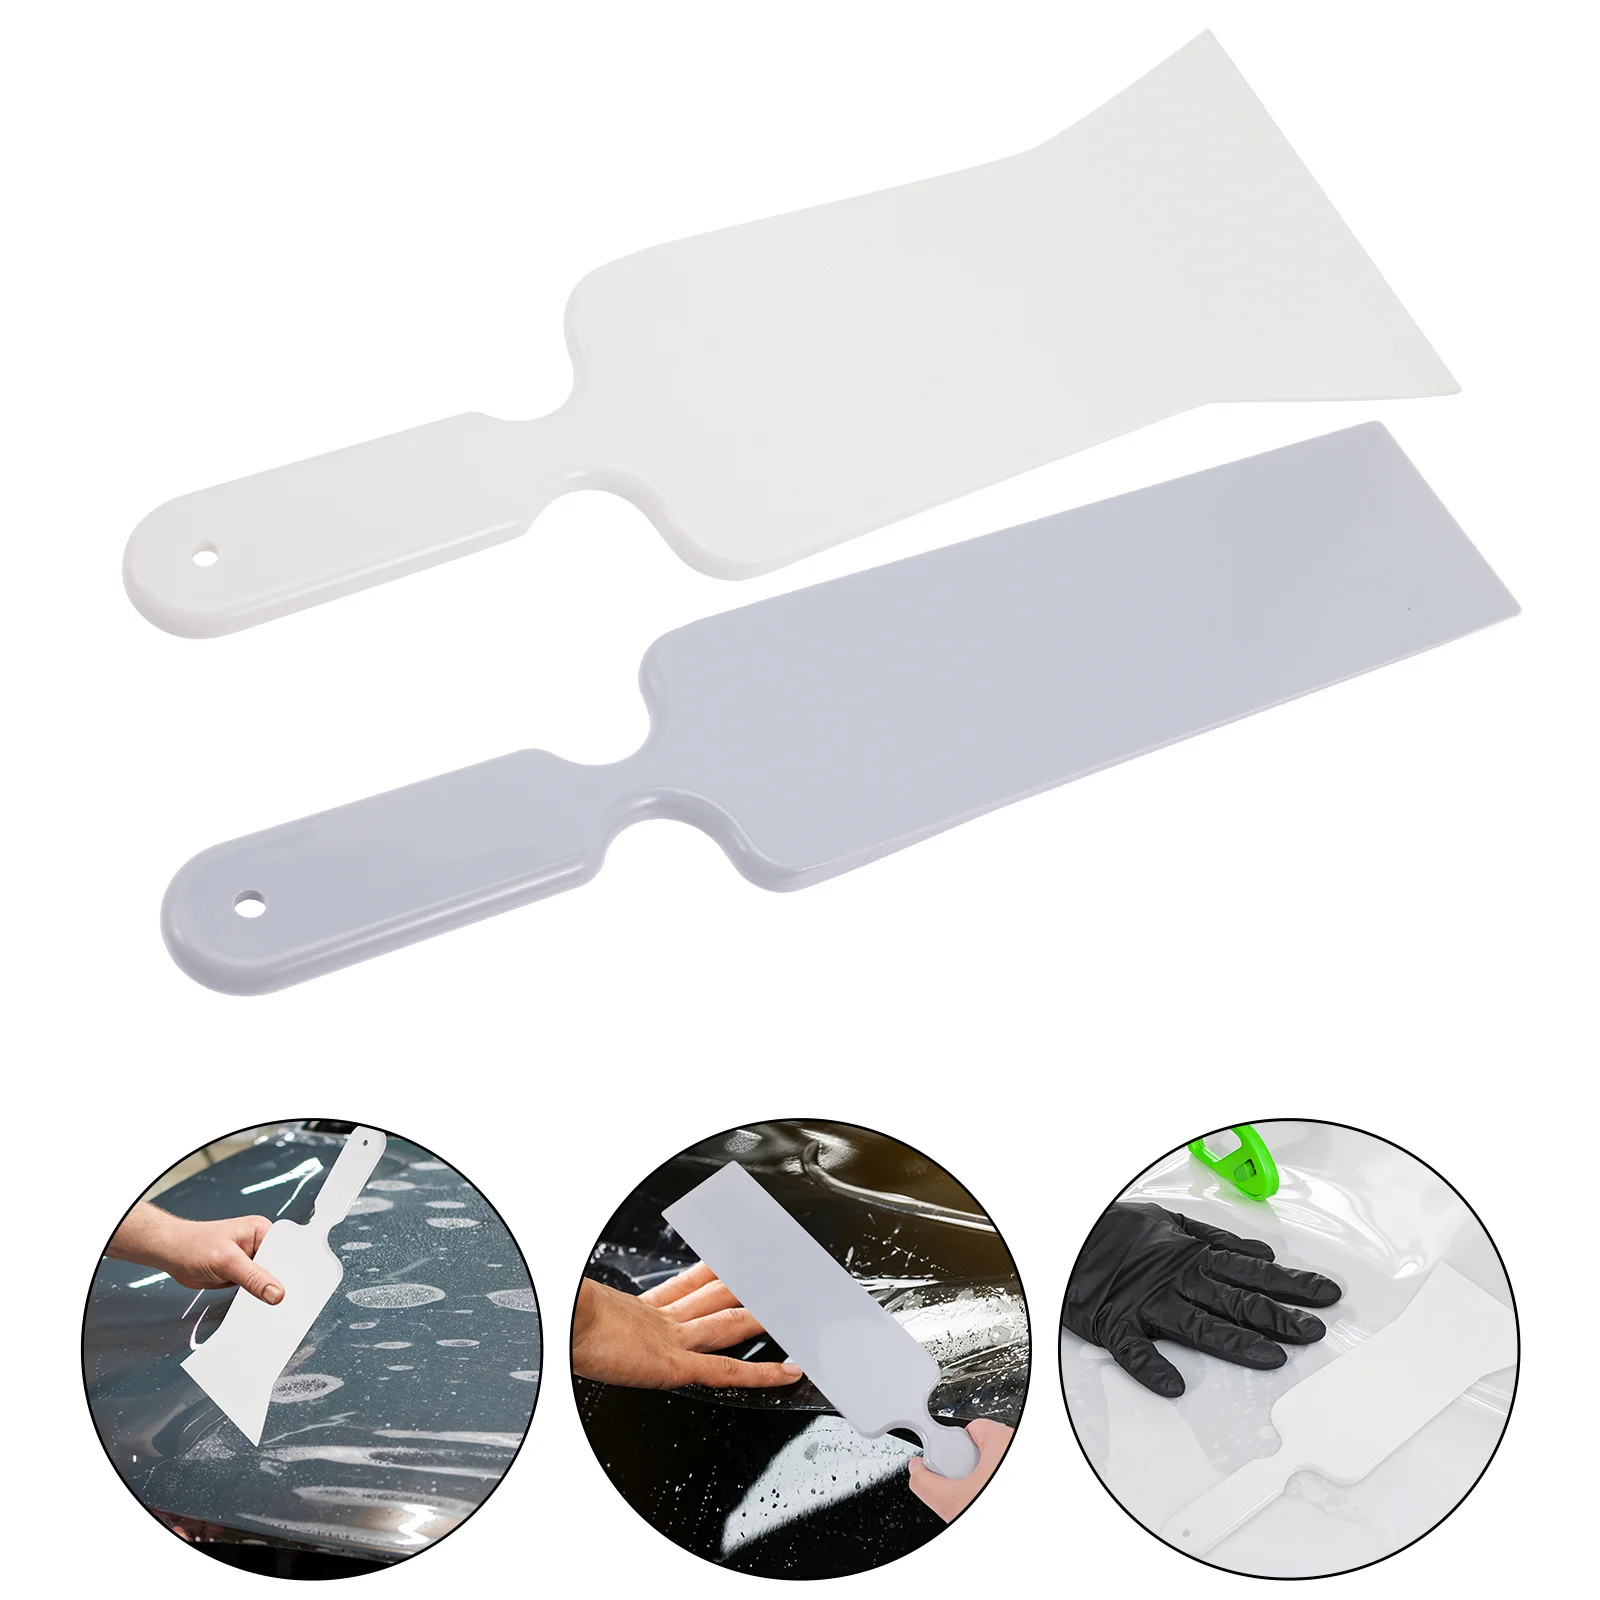 

2 Pcs Car Film Tool Windshield Scraper Vehicle Window Wrapping Automotive Specialty Tools Tint Squeegee Scrapers Glass Lengthen